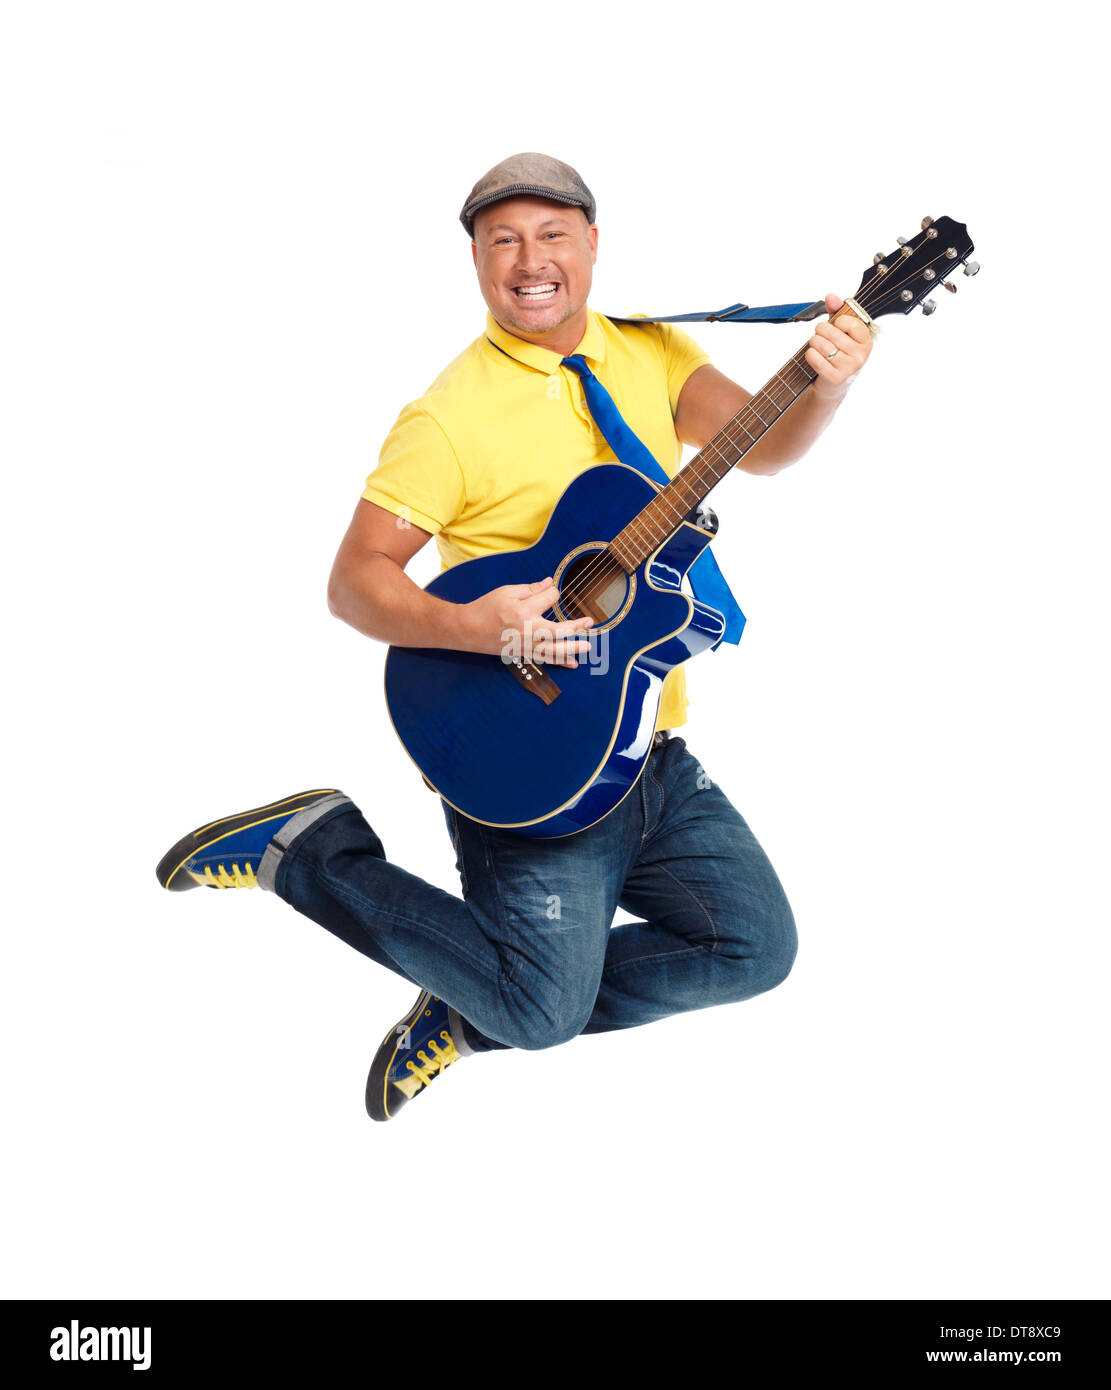 Happy smiling young man guitar player jumping with an acoustic guitar in the air isolated on white background Stock Photo